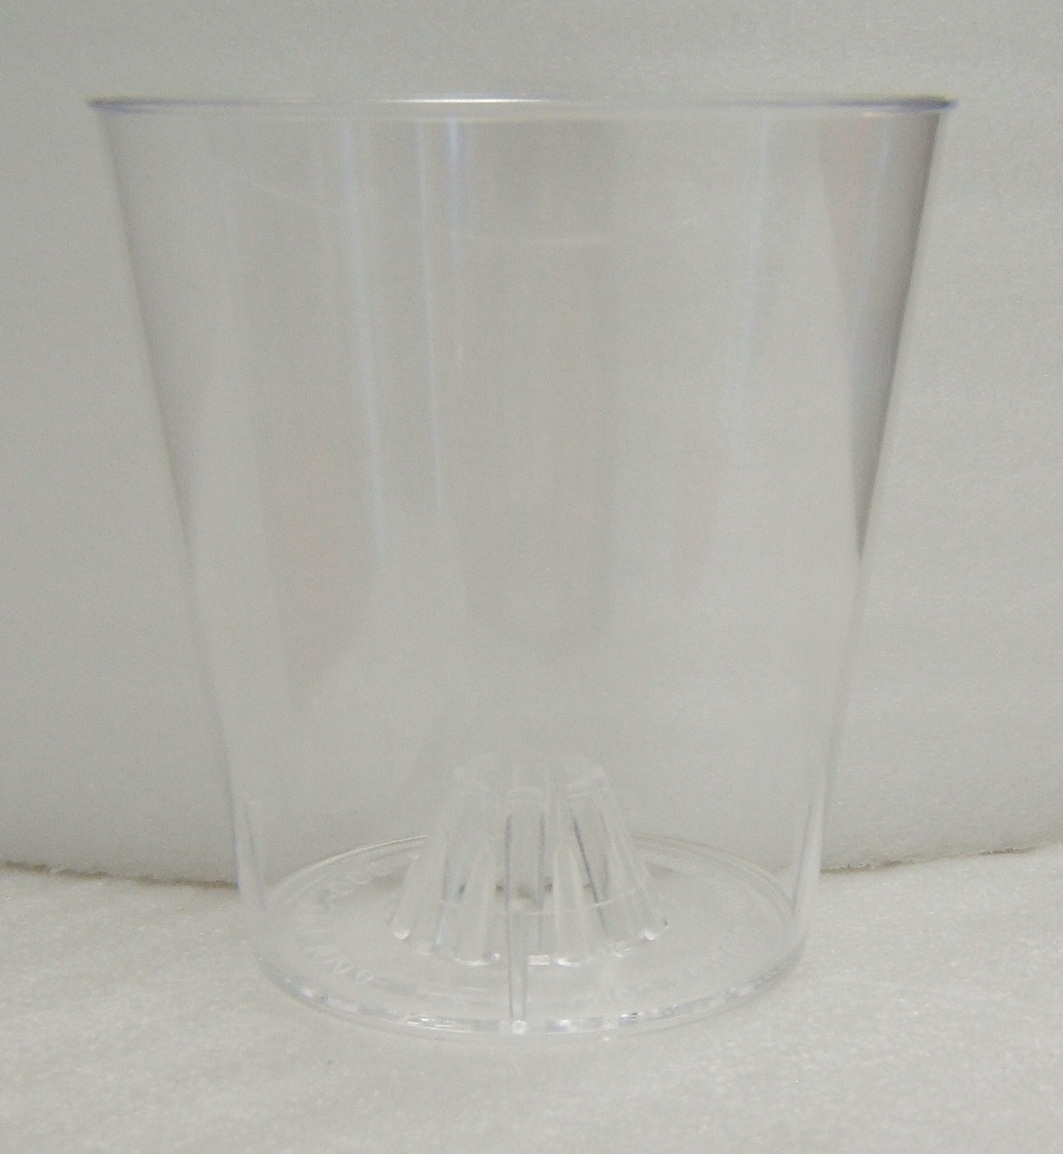 Clear Plastic Celebration Cup drip protector wind protector candlelight service